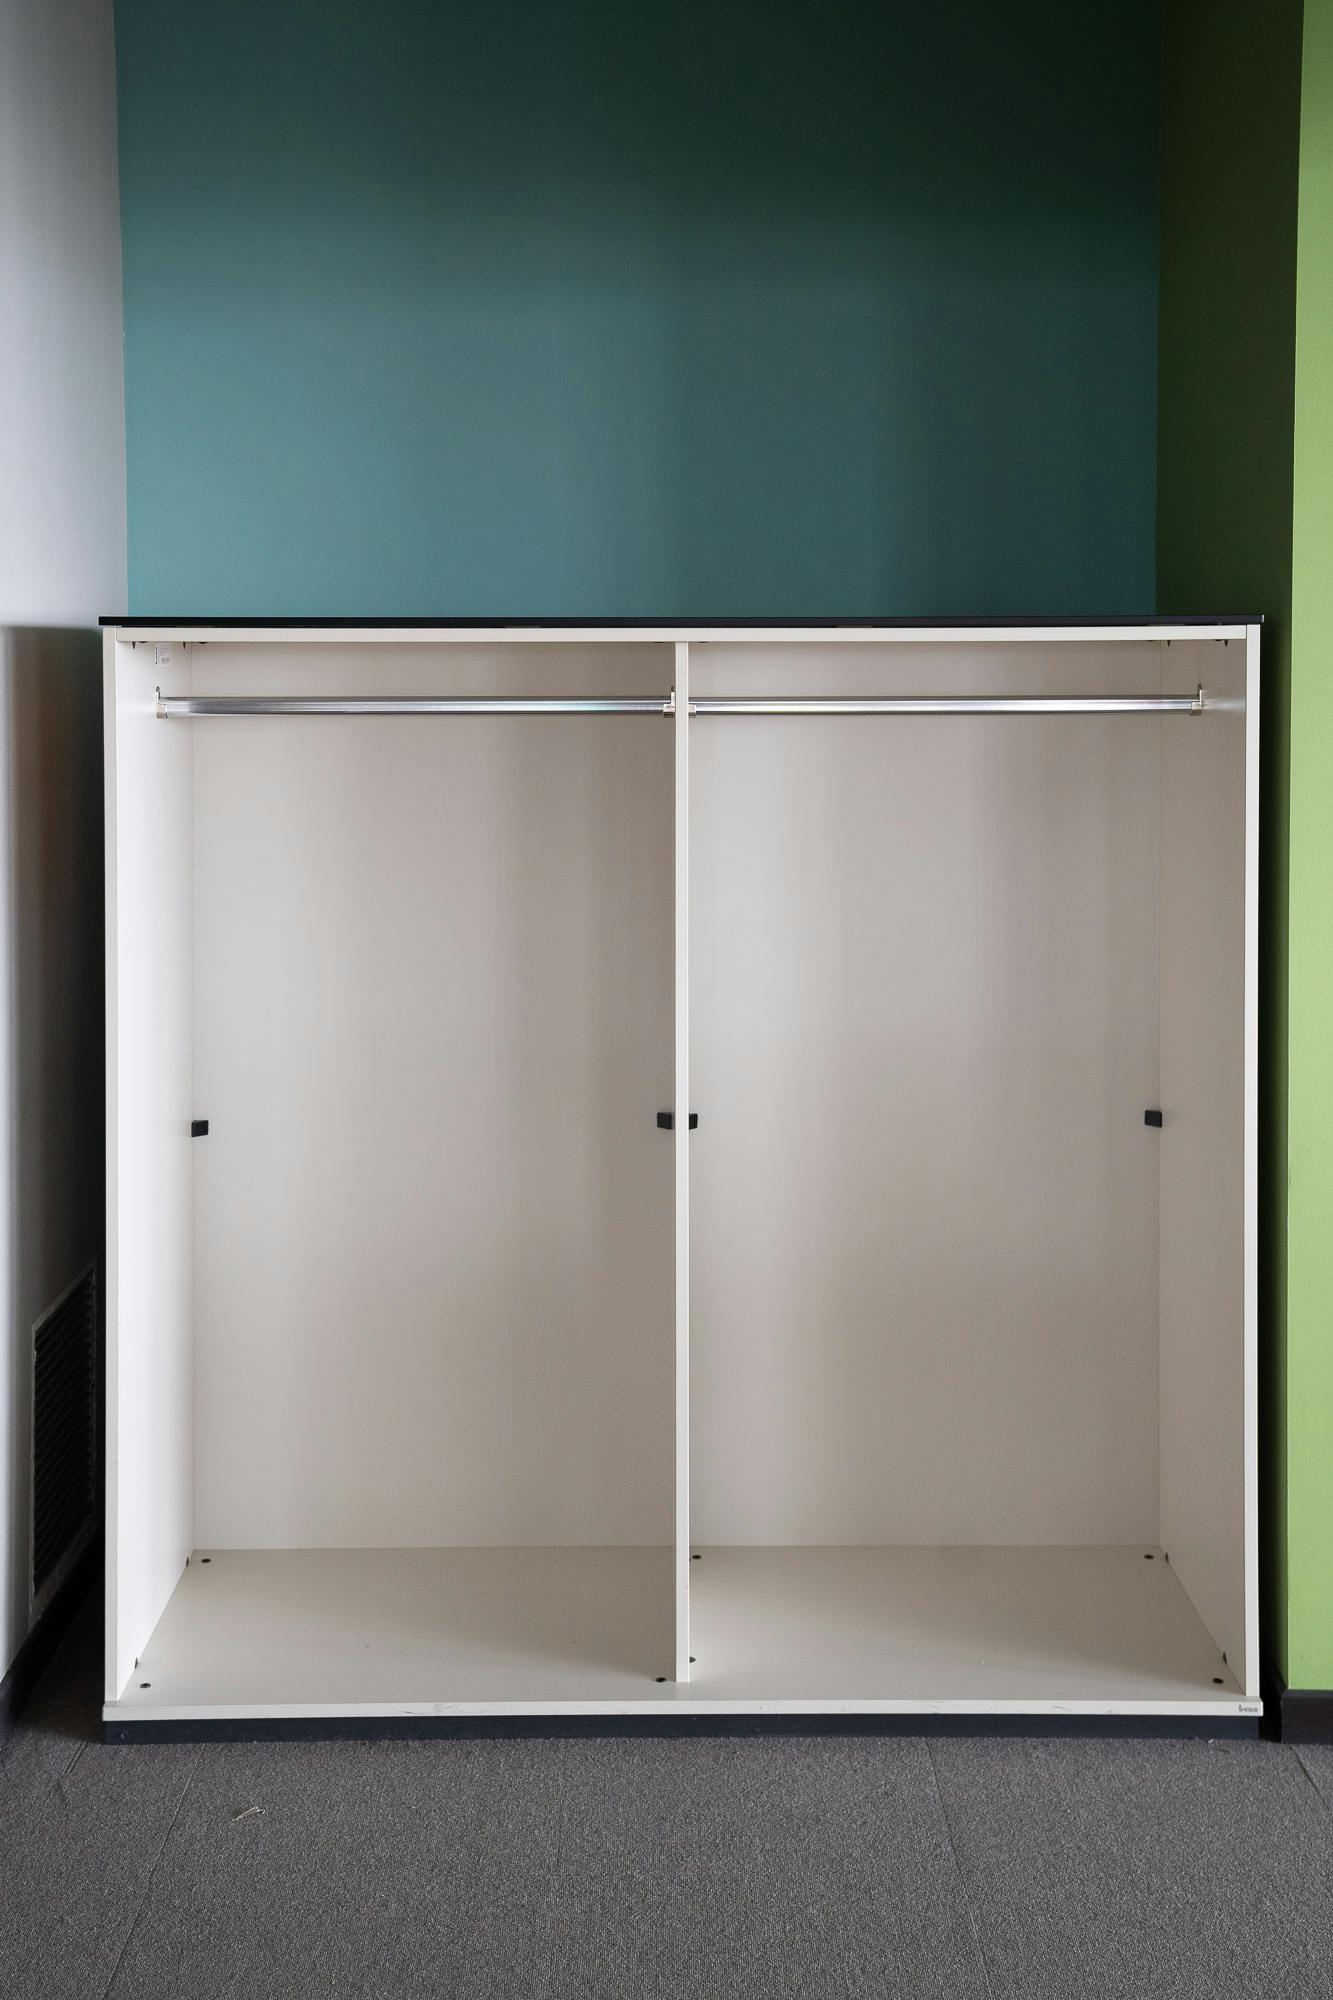 Penderie BENE - Second hand quality "Storage" - Relieve Furniture - 1